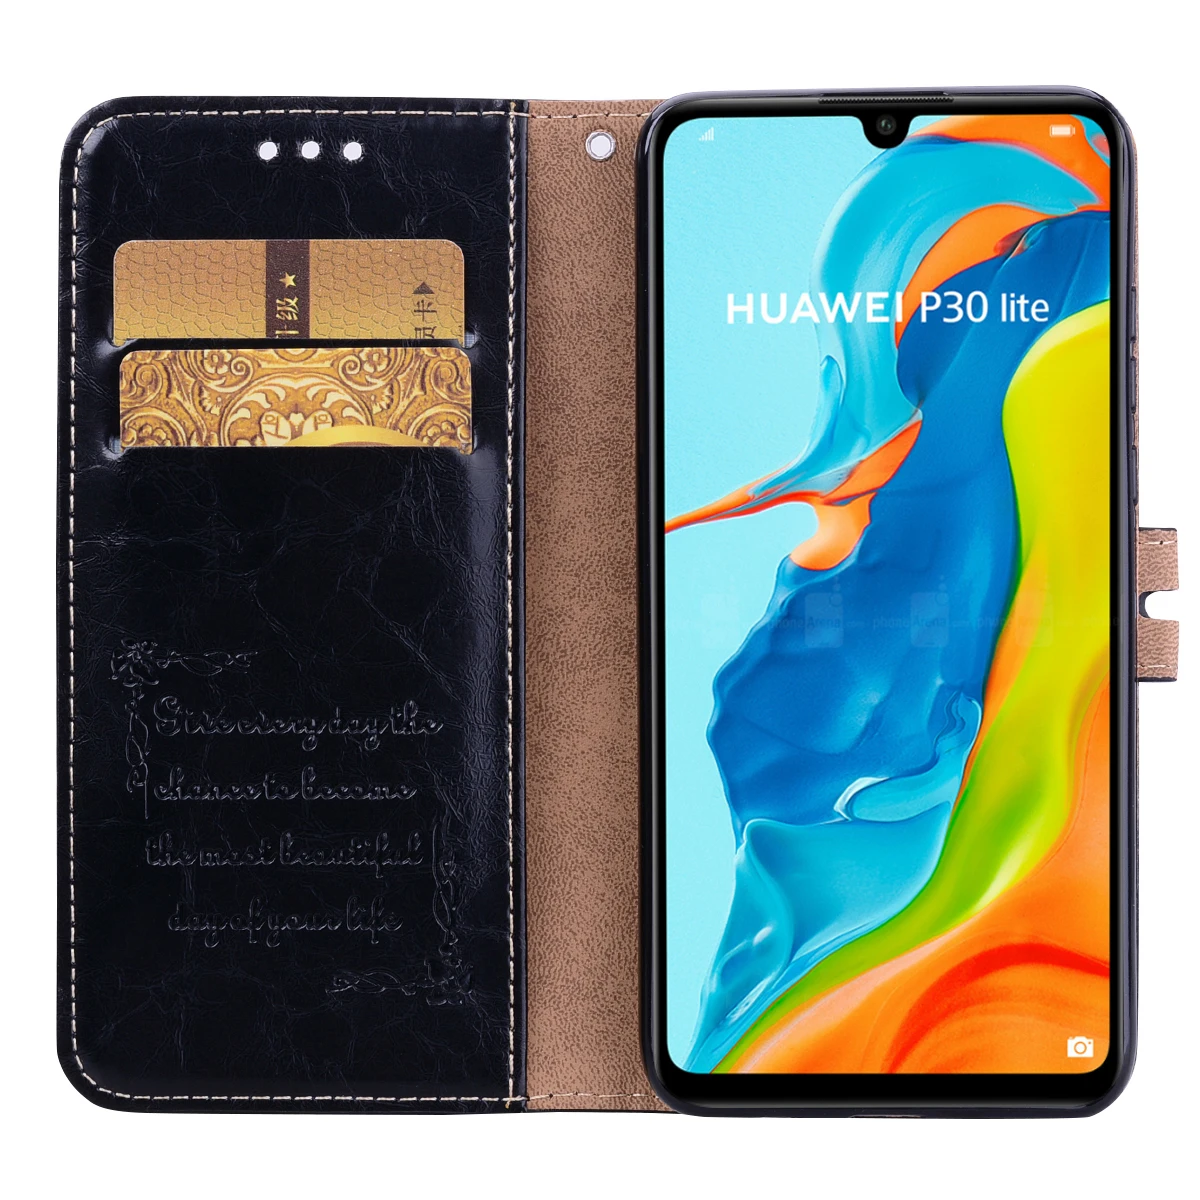 

Wallet Leather Case For Huawei P30 P20 P10 P9 Lite Mini Nova 2i Honor 8C 8X 8 Lite 7X 6X 6A Mate 20 Lite Pro Y5 II Y6 GR5 2017